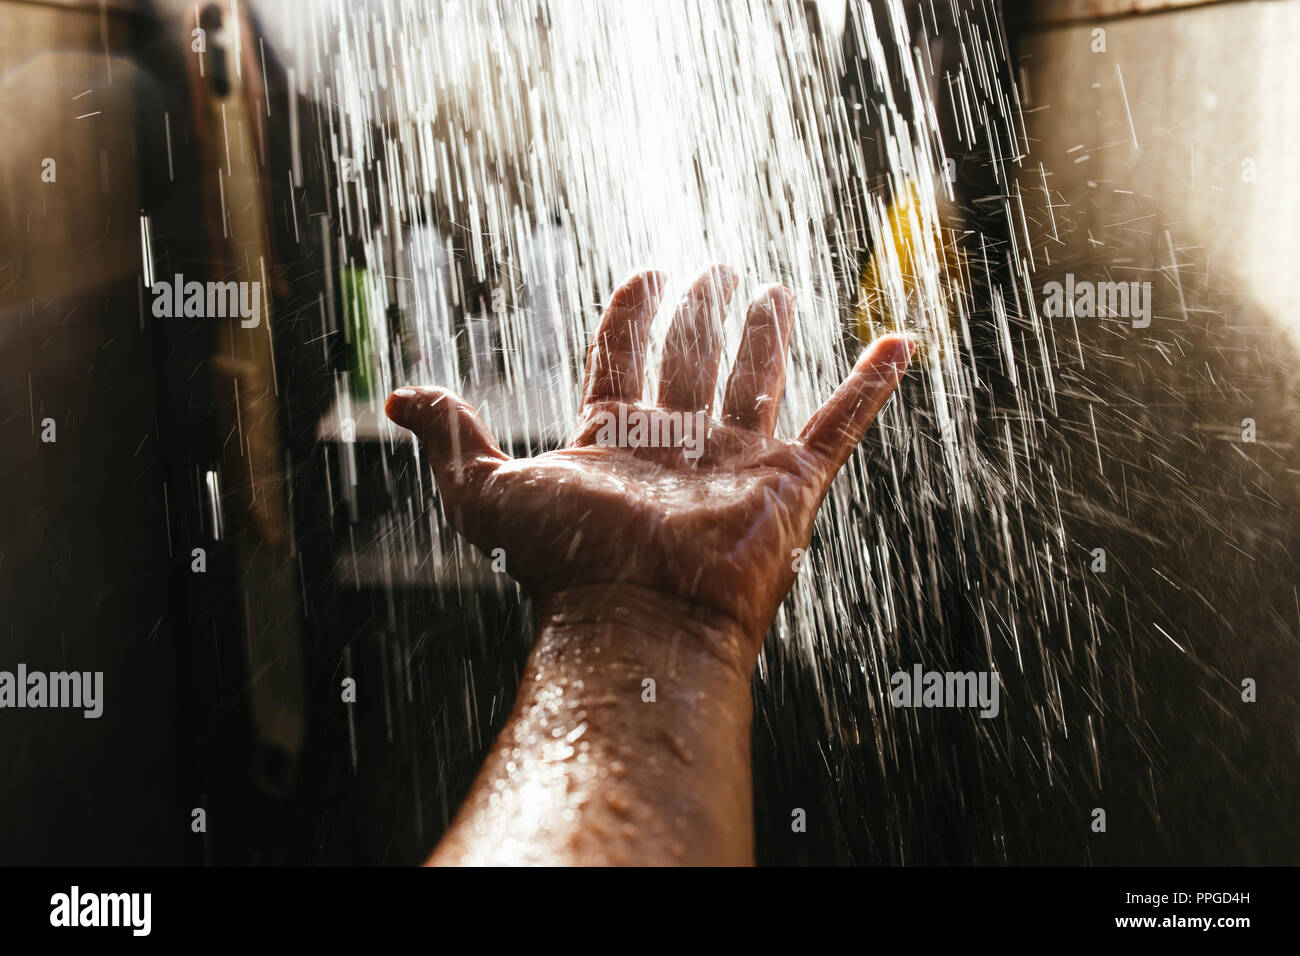 A man's hand in a spray of water in the sunlight against a dark background. Water as a symbol of purity and life. Stock Photo